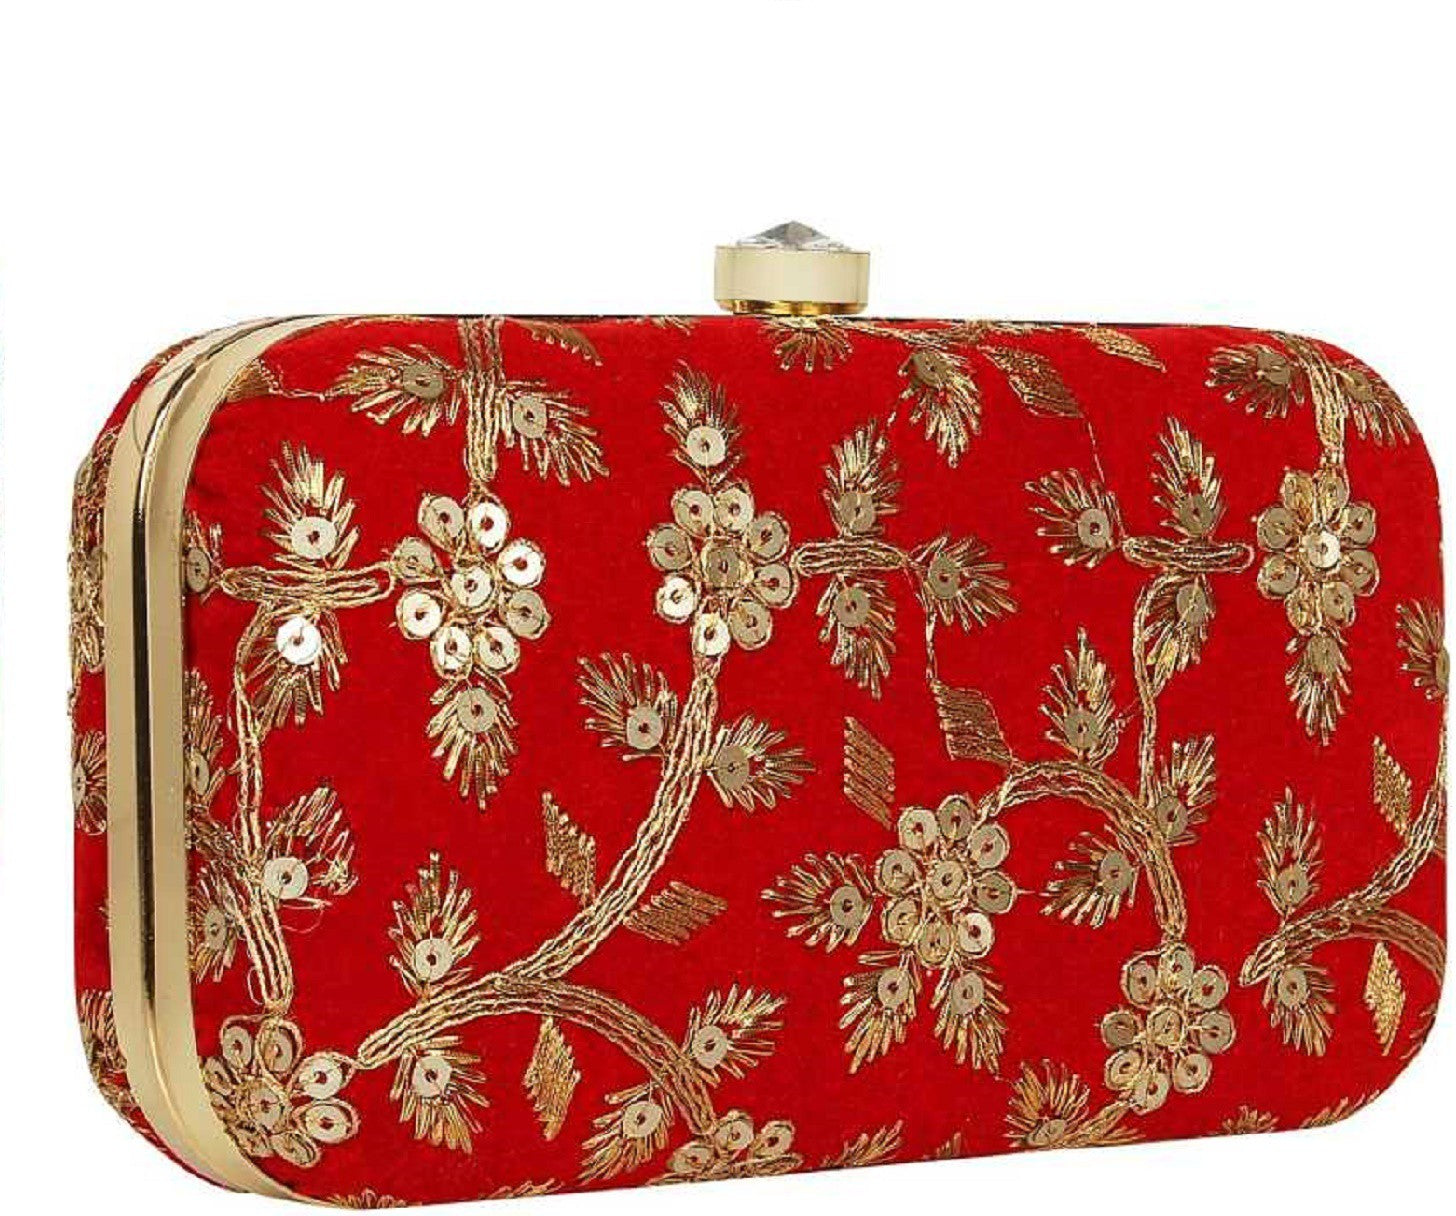 Women's Handicraft Party Wear Hand Embroidered Box Clutch Bag Purse For Bridal, Casual, Party, Wedding - Red - Ritzie